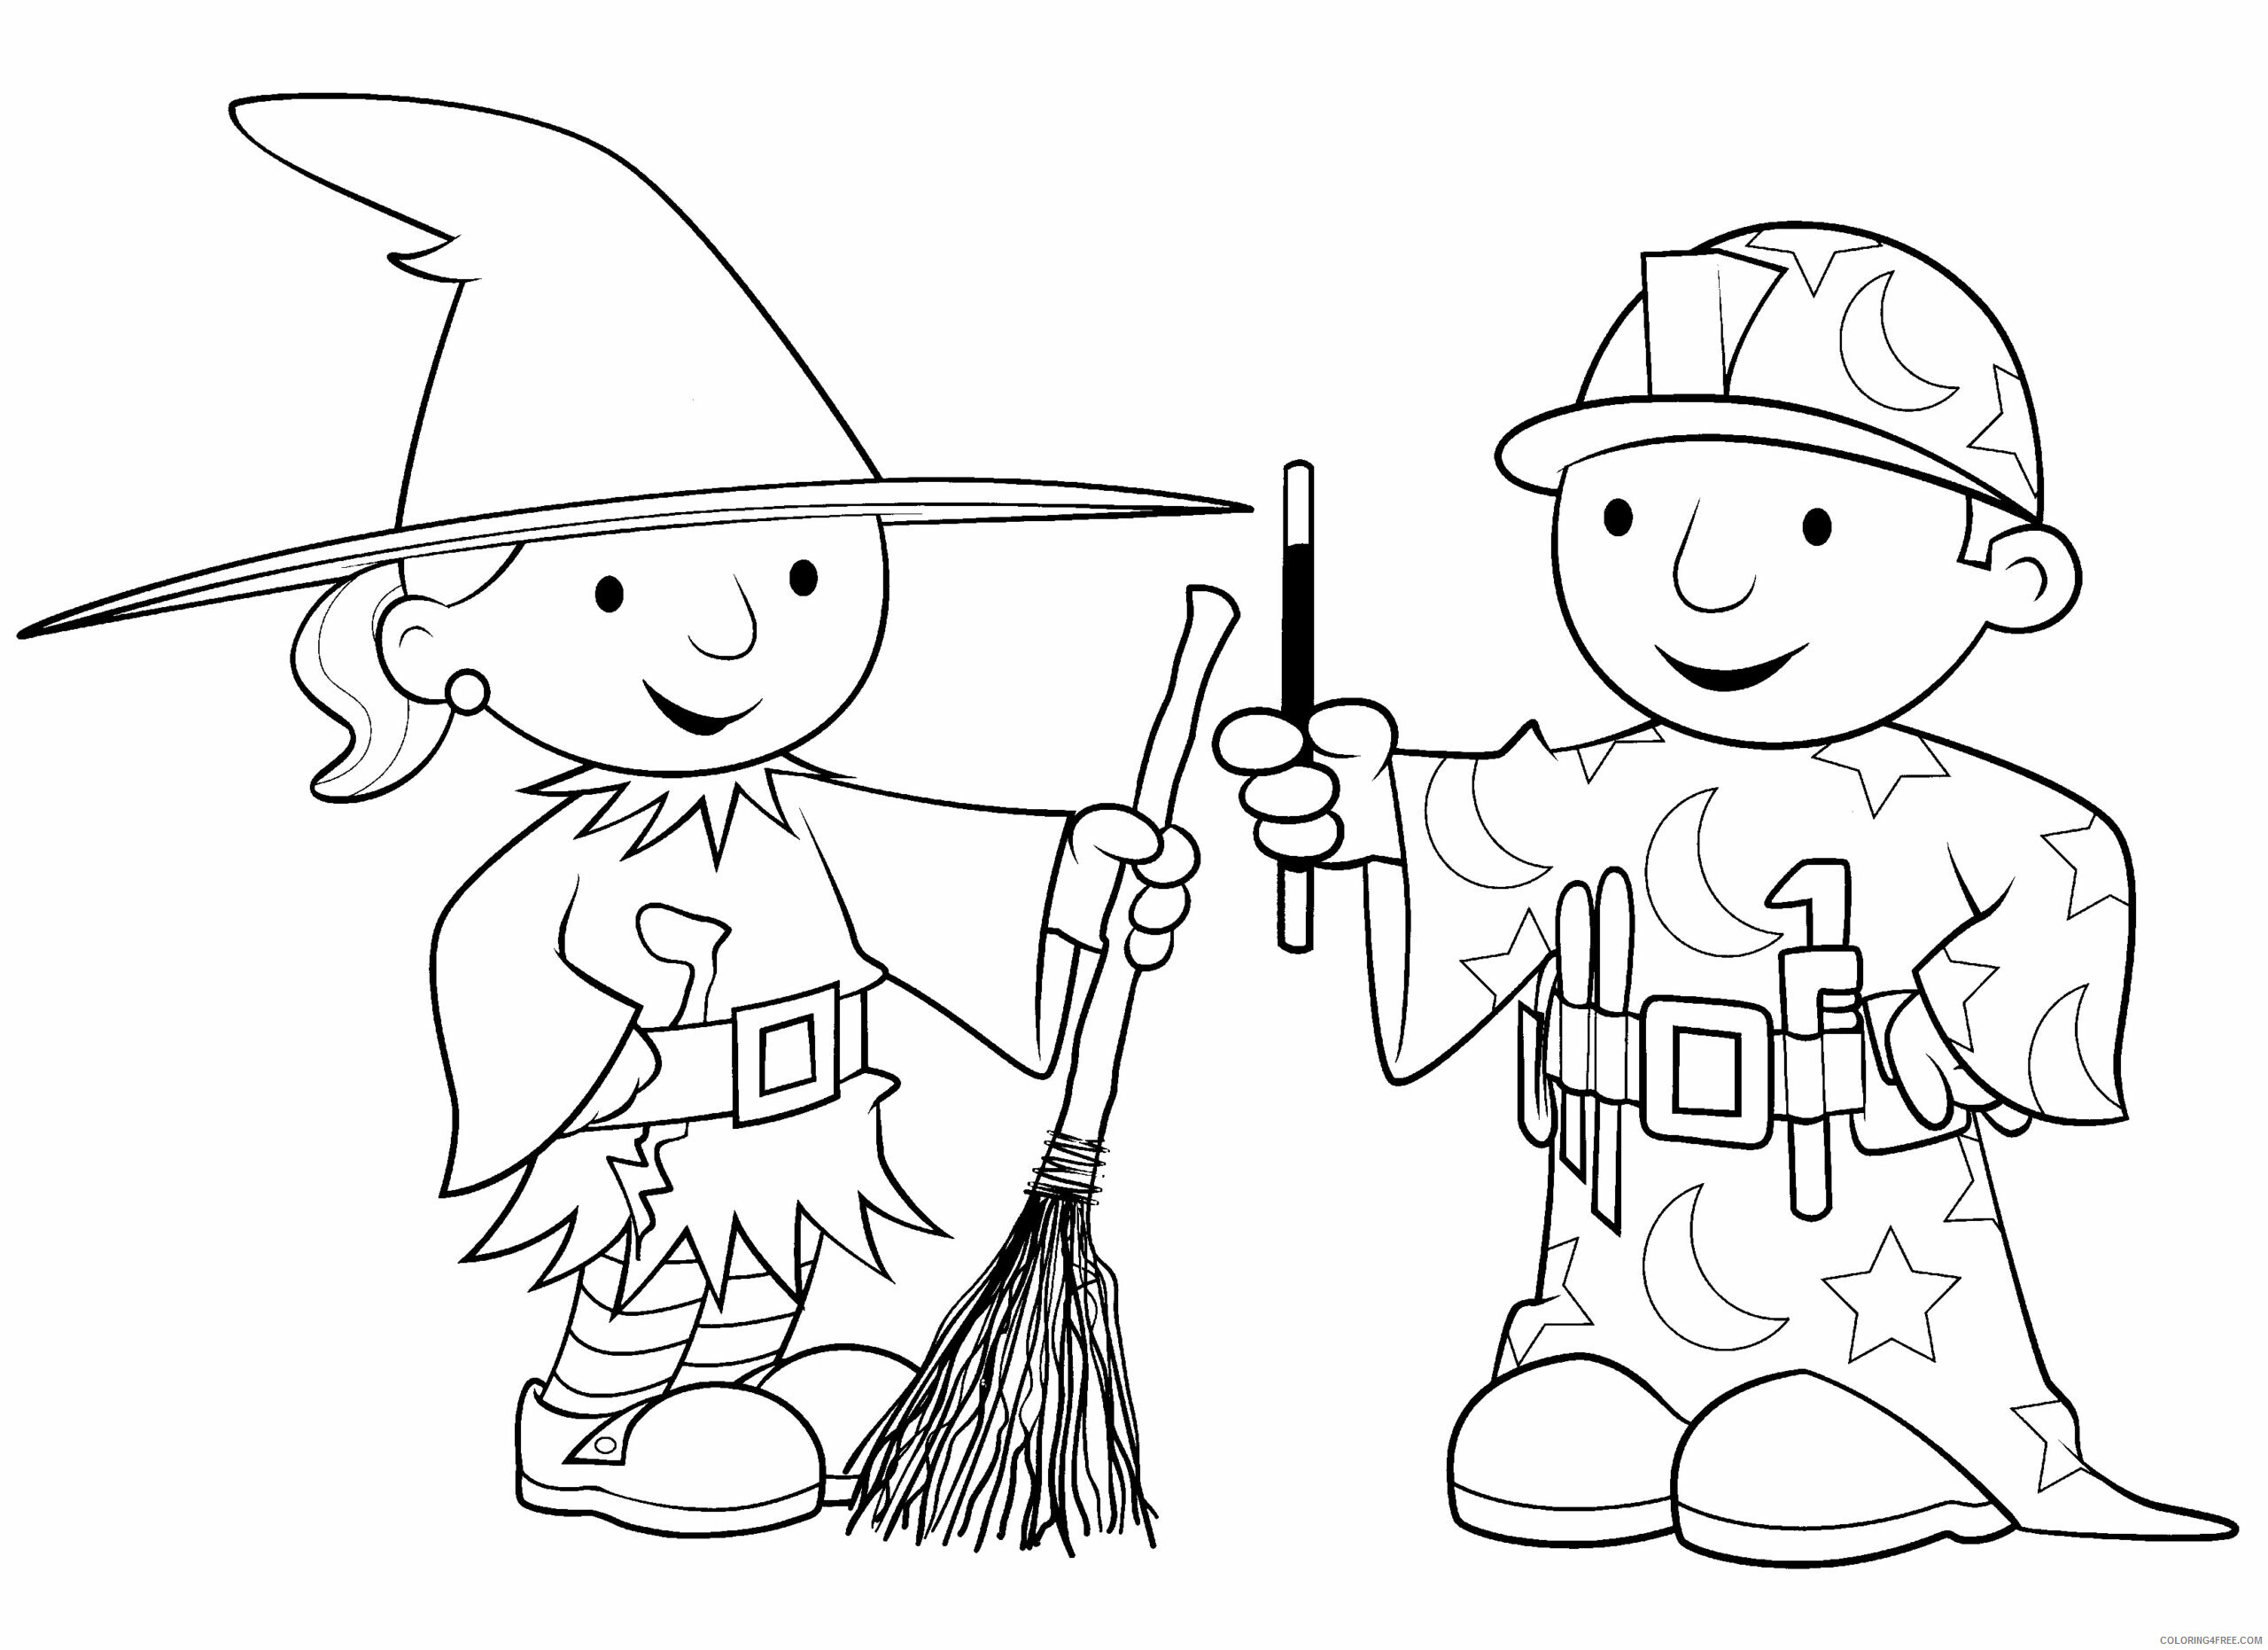 Bob the Builder Coloring Pages TV Film bob the builder 1 2 Printable 2020 01003 Coloring4free